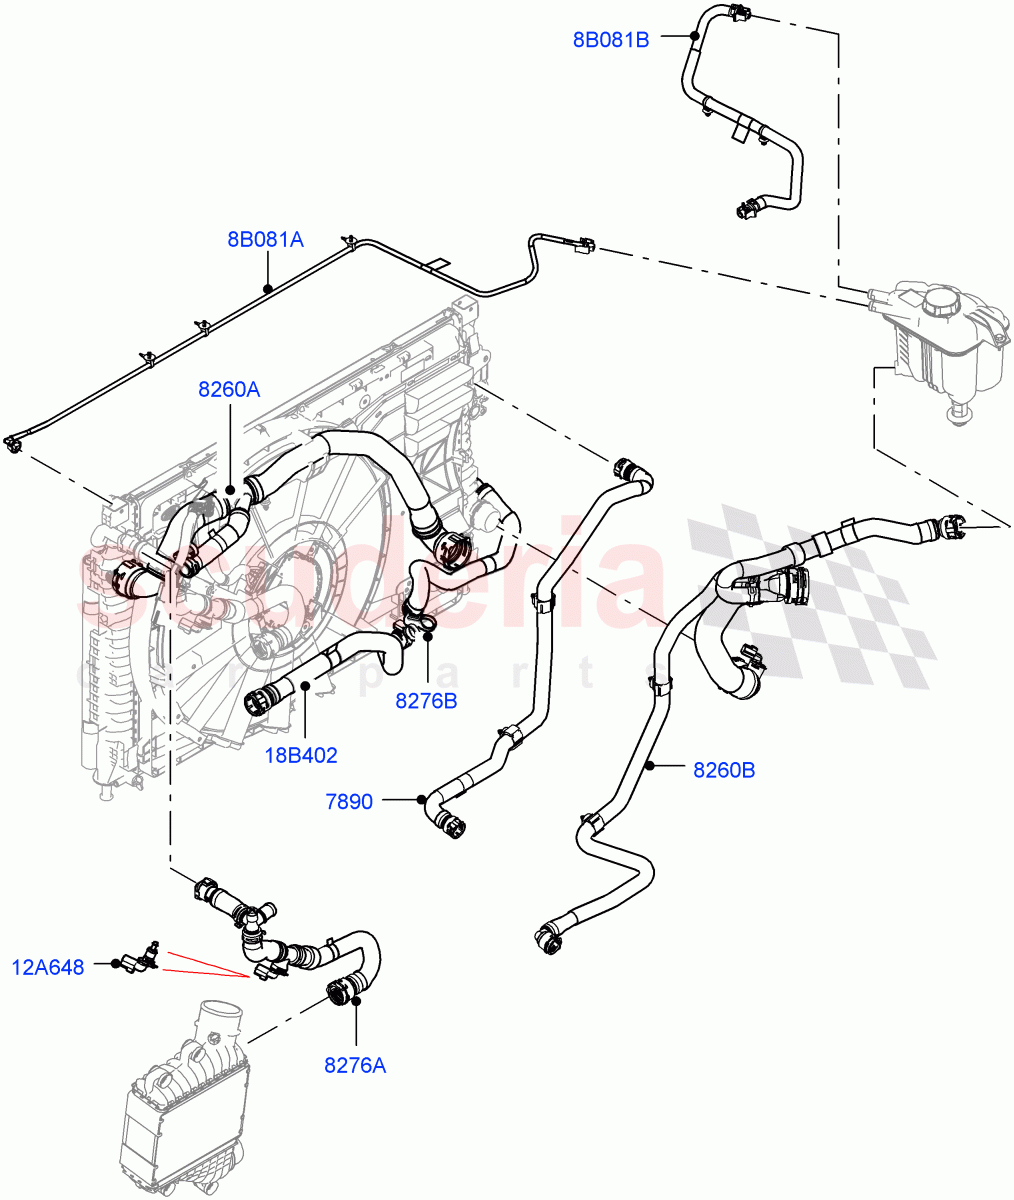 Cooling System Pipes And Hoses(2.0L AJ21D4 Diesel Mid,9 Speed Auto Trans 9HP50,Itatiaia (Brazil)) of Land Rover Land Rover Range Rover Evoque (2019+) [2.0 Turbo Diesel AJ21D4]